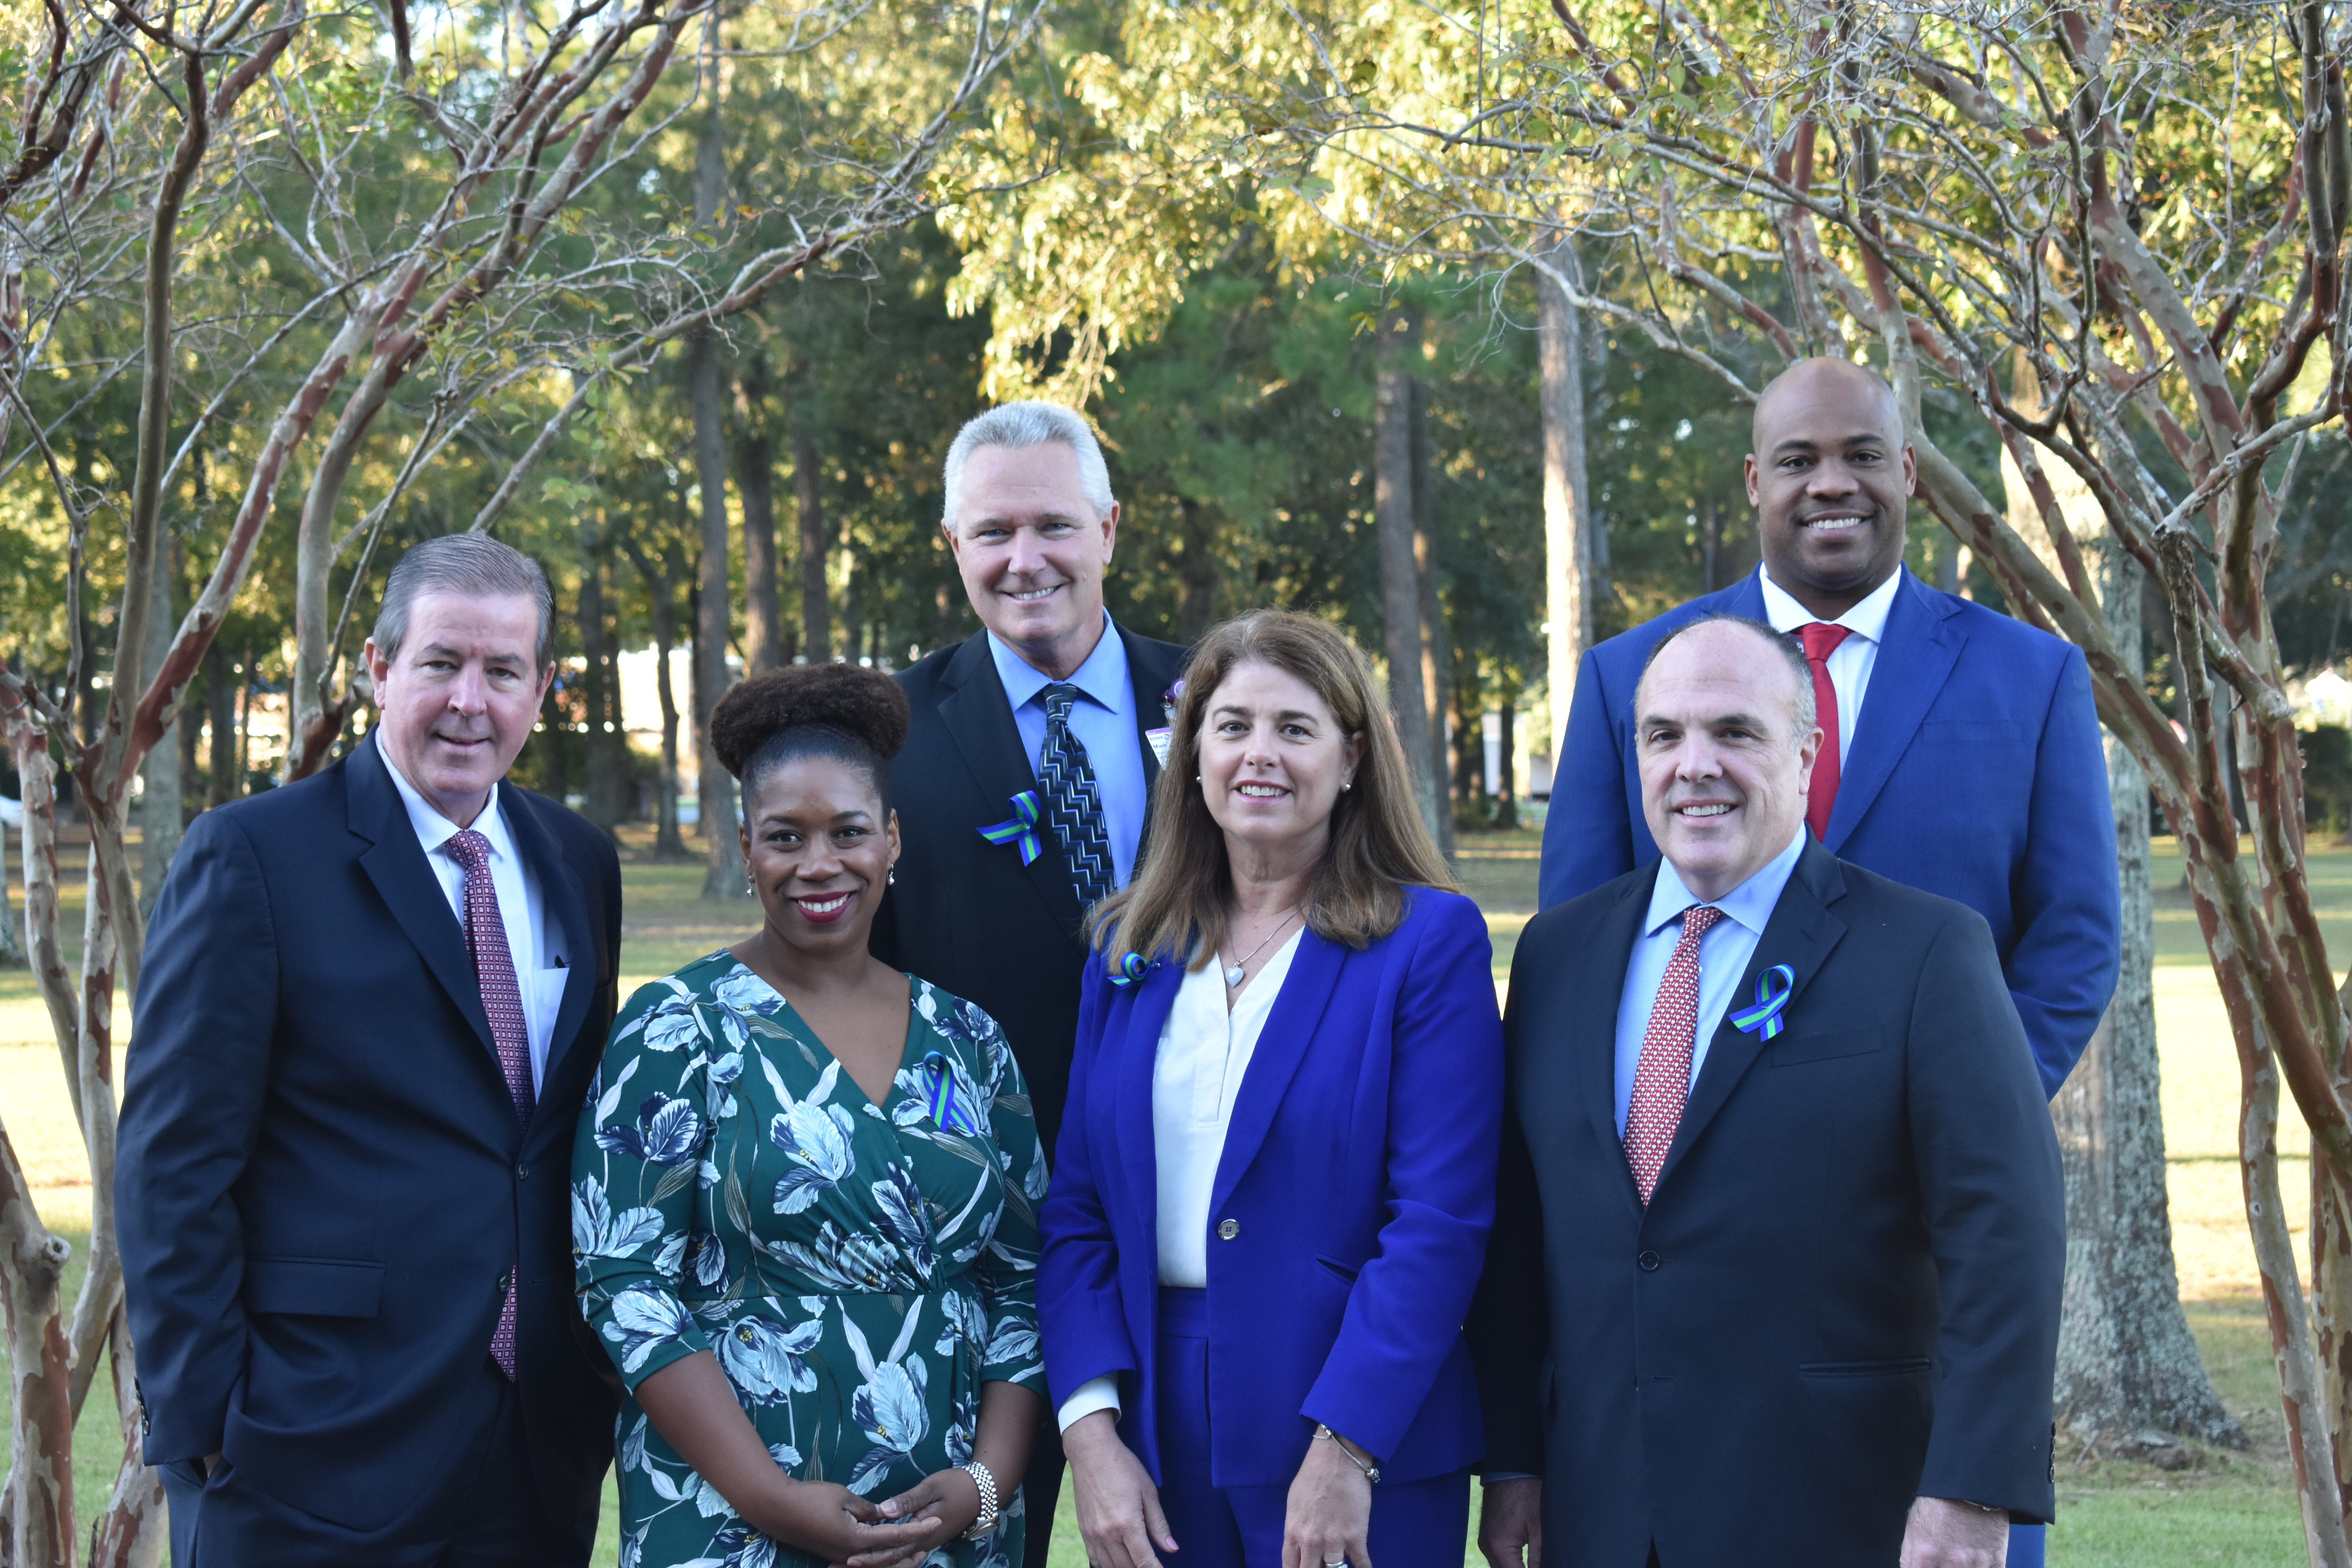 From left to right: Representatives from the HTC Core Partners - Chris Kerrigan and Kellye McKenzie (Trident United Way), Mark Dickson and Lorraine Lutton (Roper St. Franics Healthcare), Dr. Patrick Cawley and Anton Gunn (MUSC)